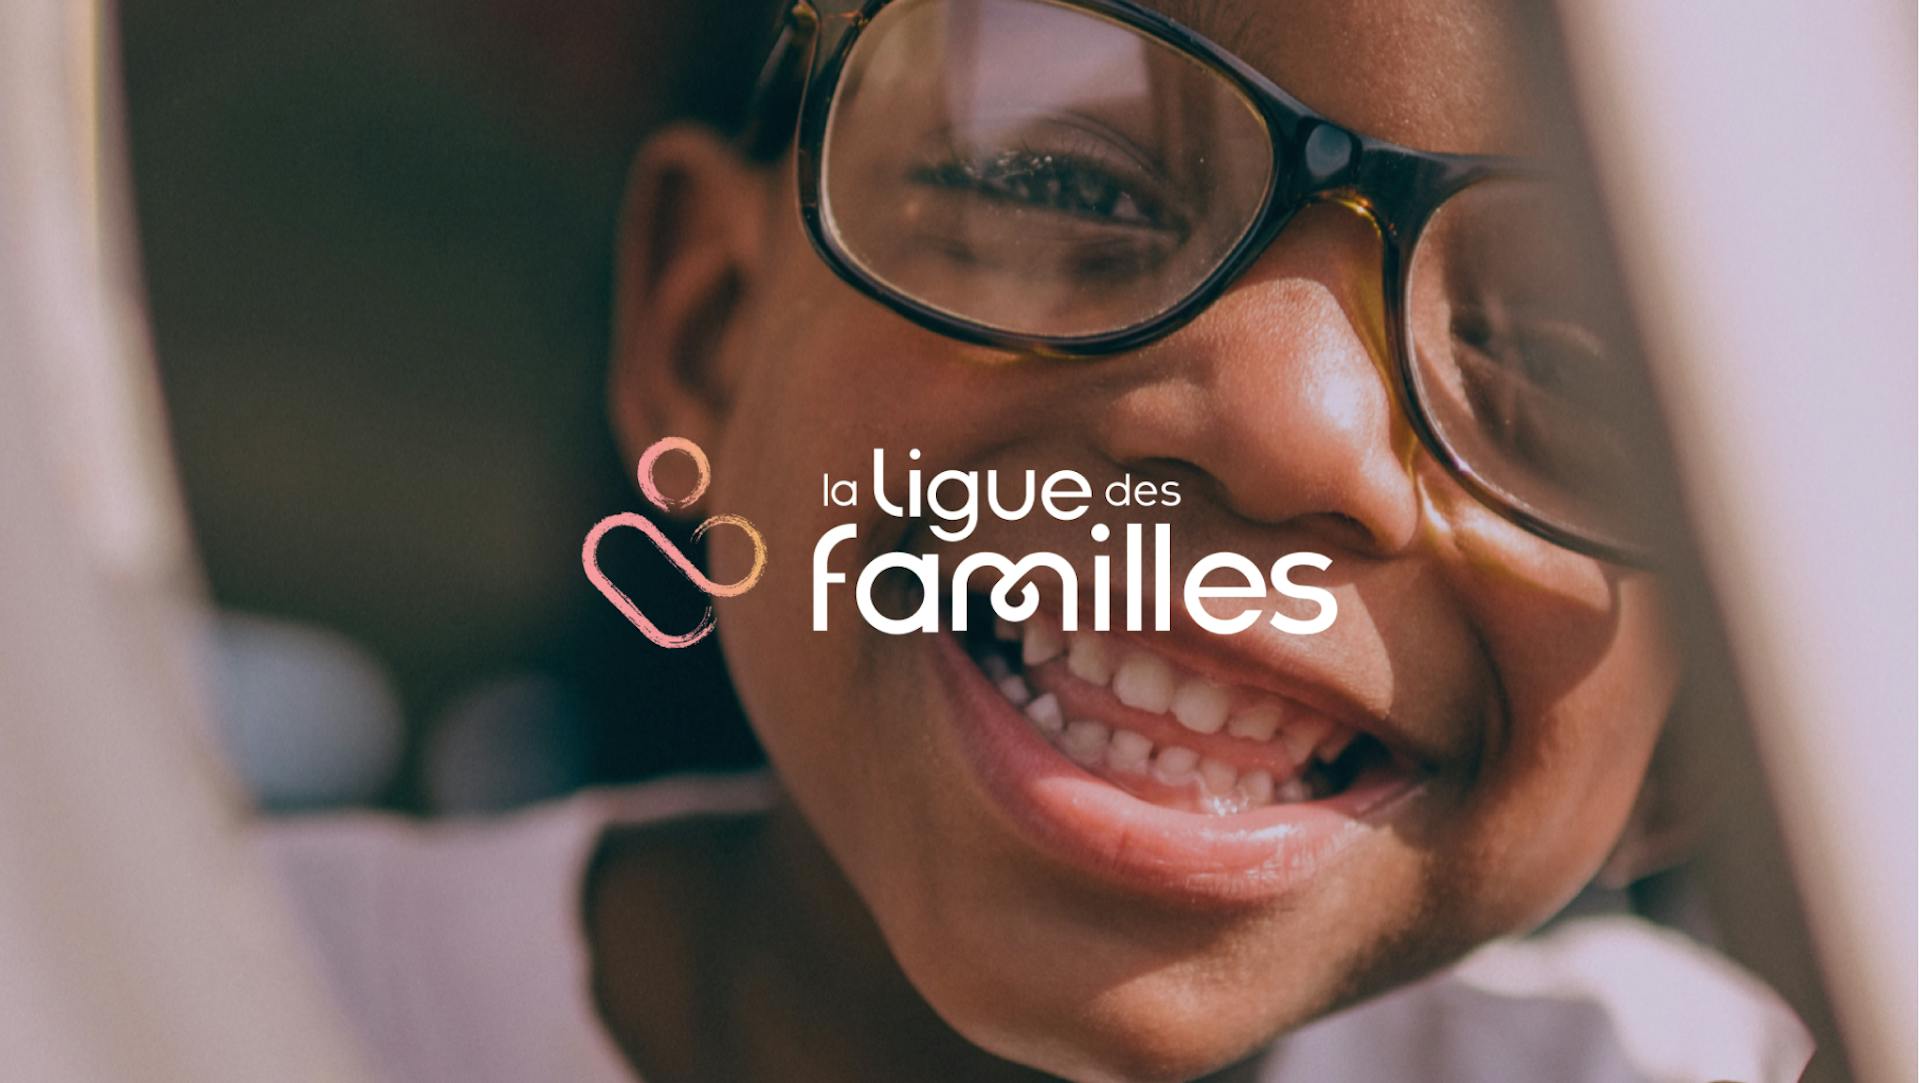 La Ligue des familles and Le Ligueur connect with their members through a brand new application.